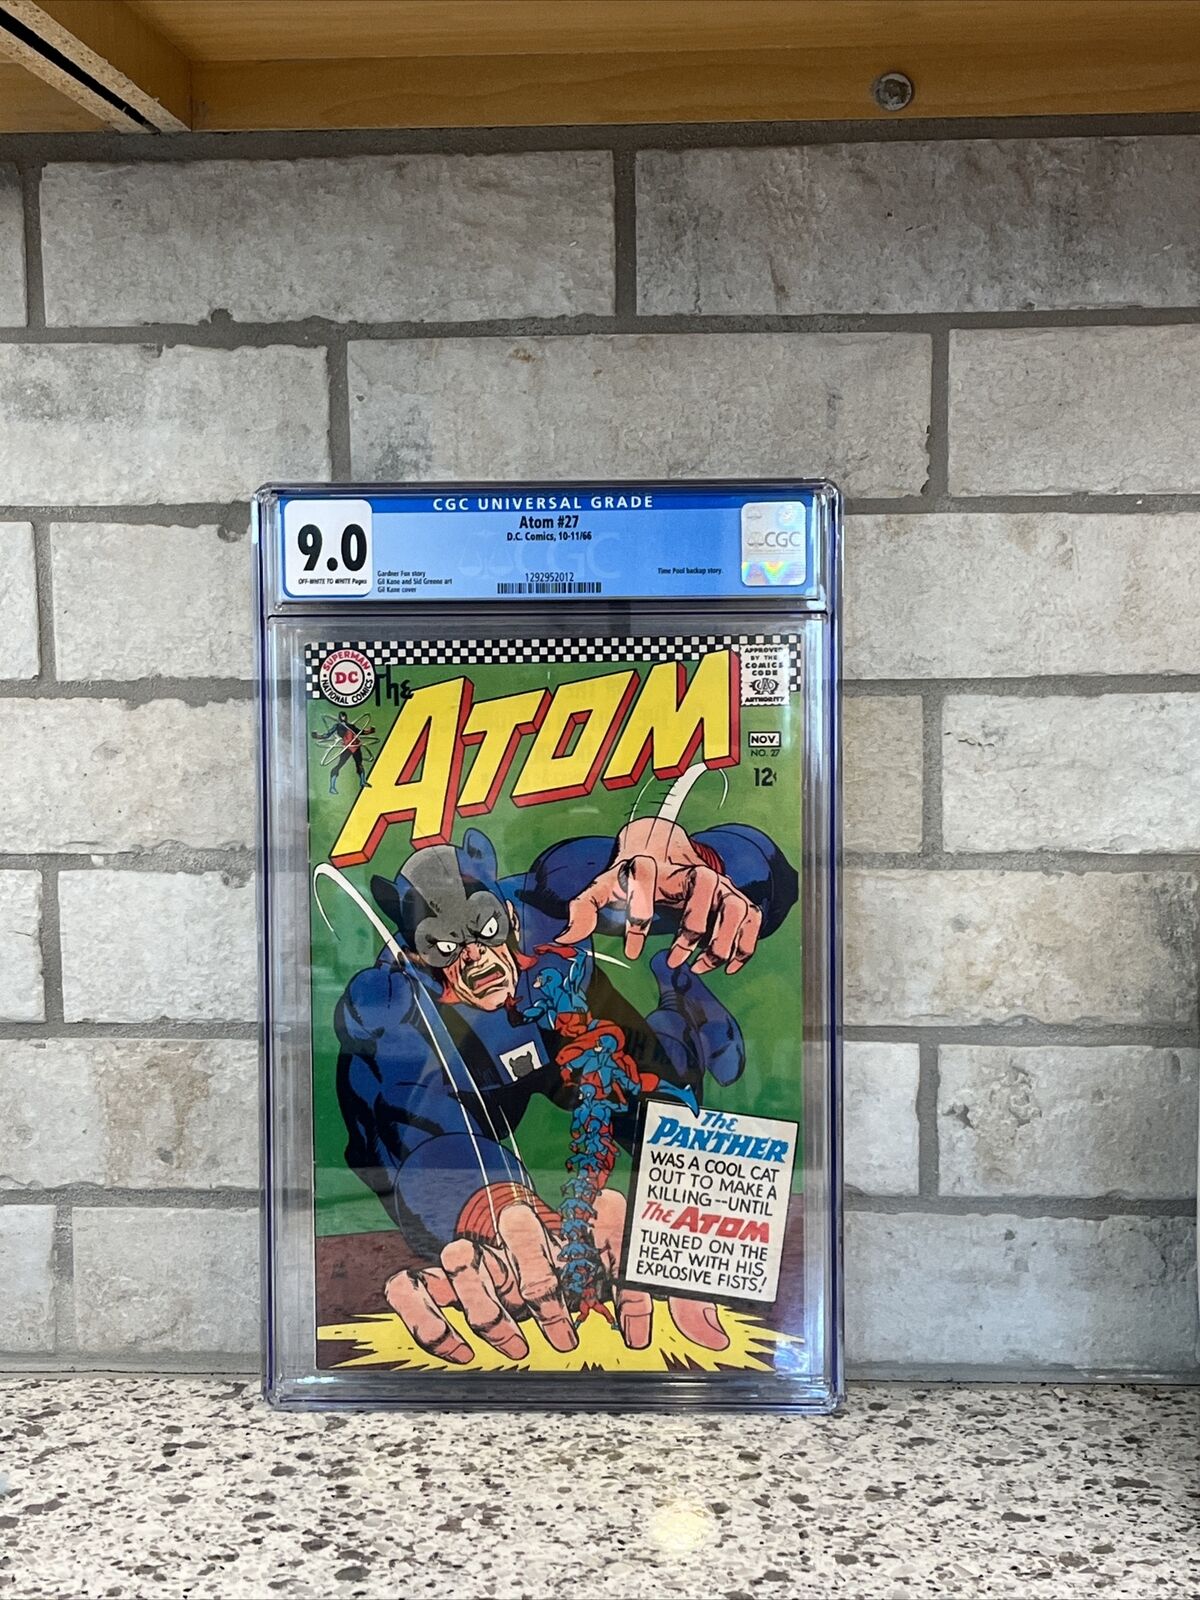 Atom #27; 11/66, Greene art;1st Panther OW/W pages; CGC 9.0, DC Comics